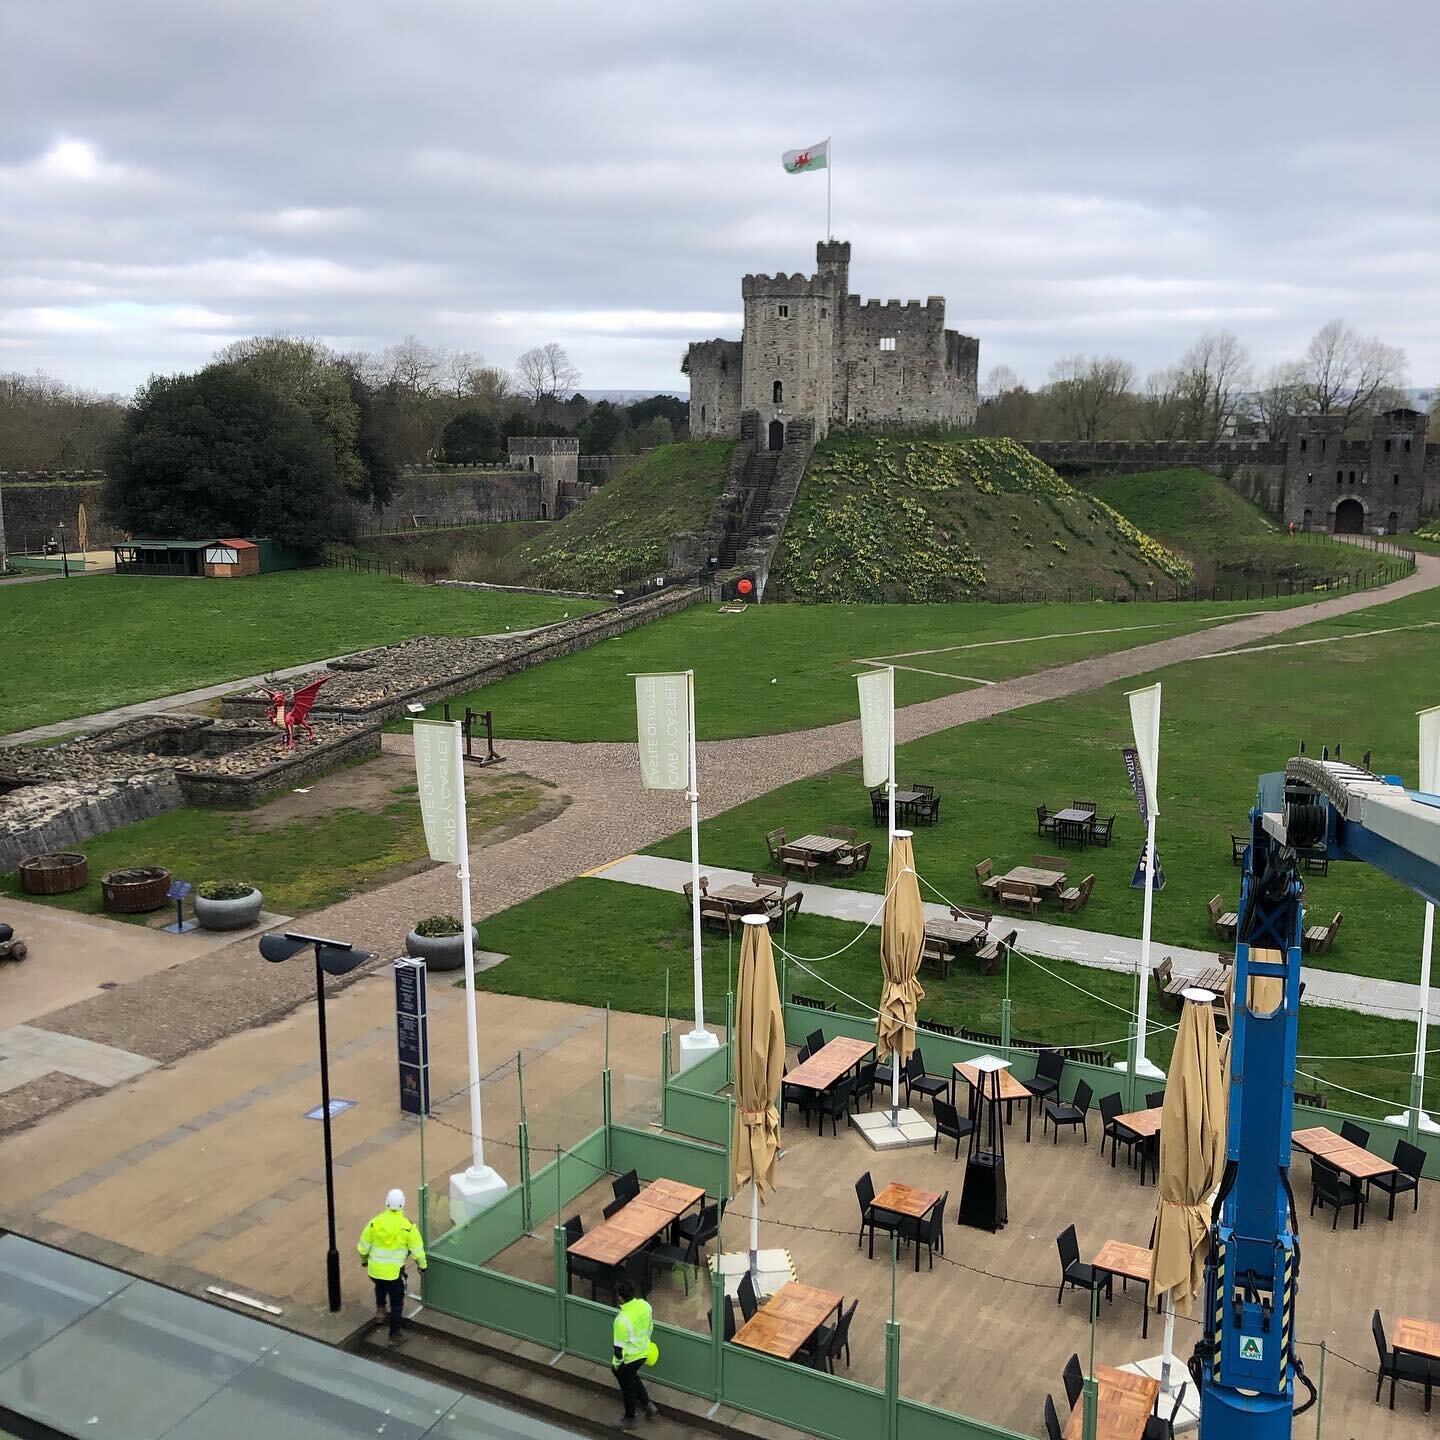 Not a bad way to spend Easter Saturday! Up bright and early with the team from @taliesin_conservation to look at some of the structure in Cardiff Castle. #structuralinspection #conservation #structuralengineering